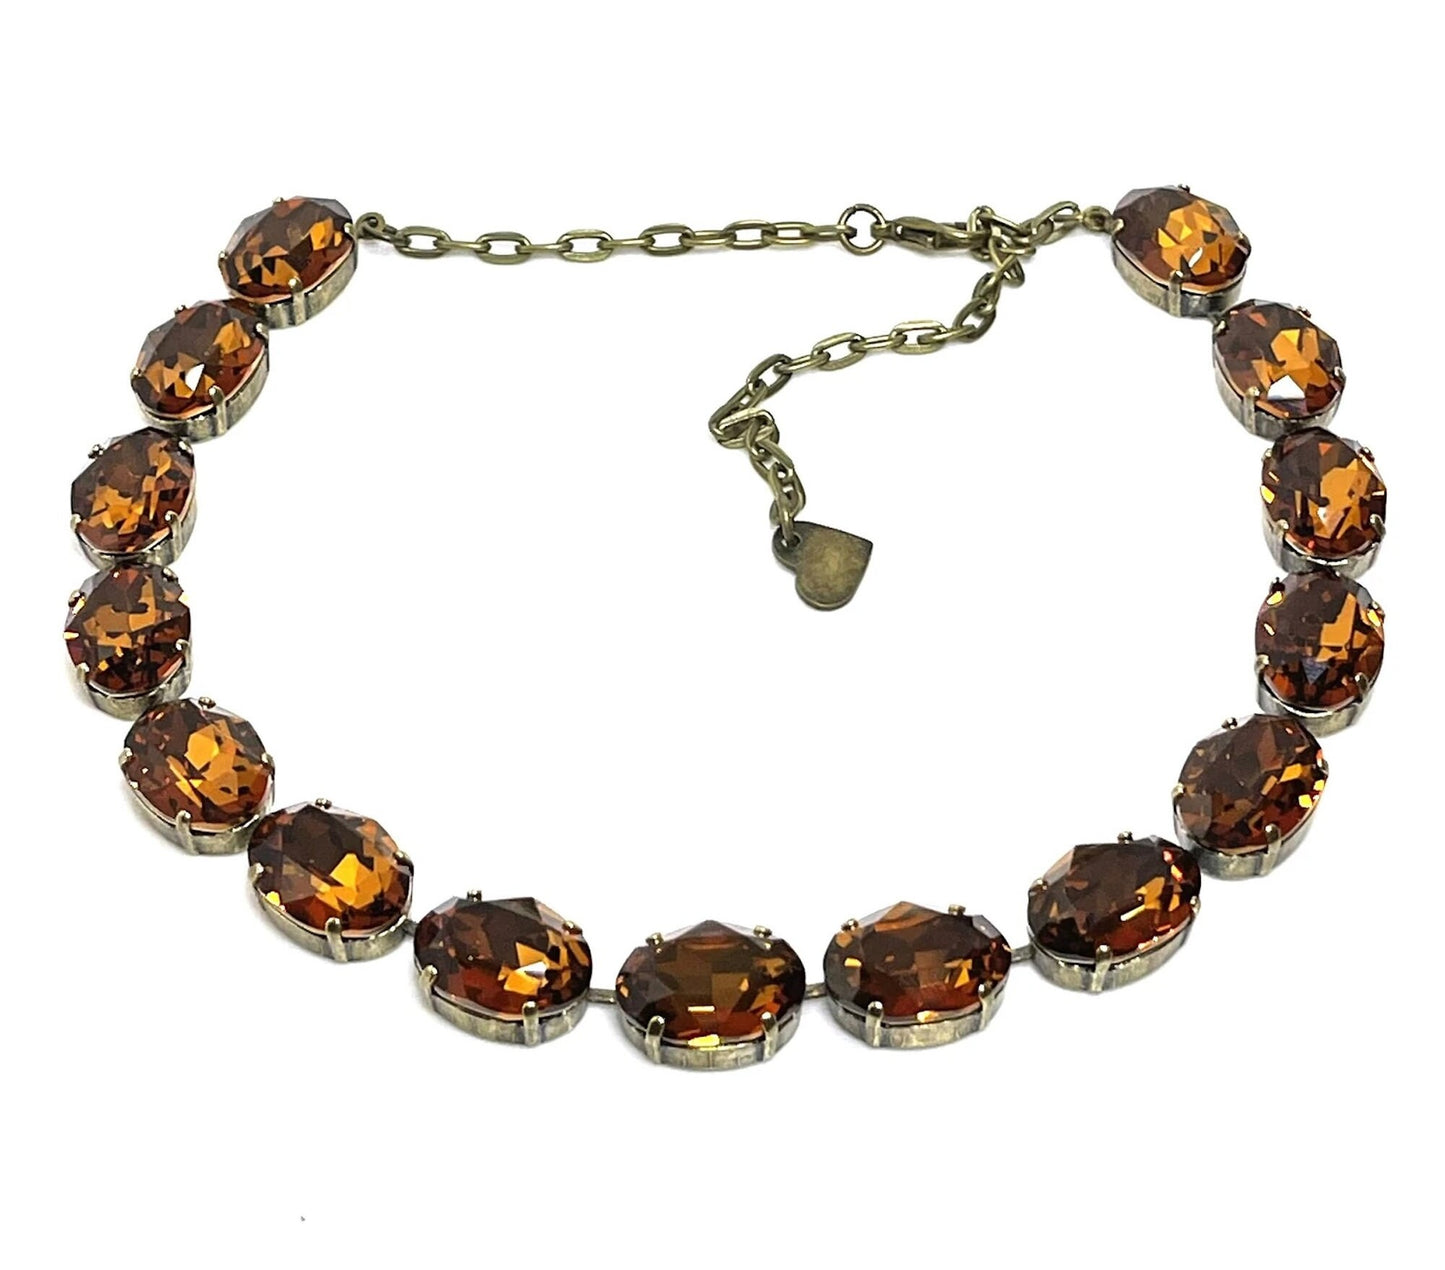 Smoked Topaz Crystal Georgian Collet Necklaces, Anna Wintour Style, Austrian Crystal, Riviere Necklace, Statement Necklaces for Women